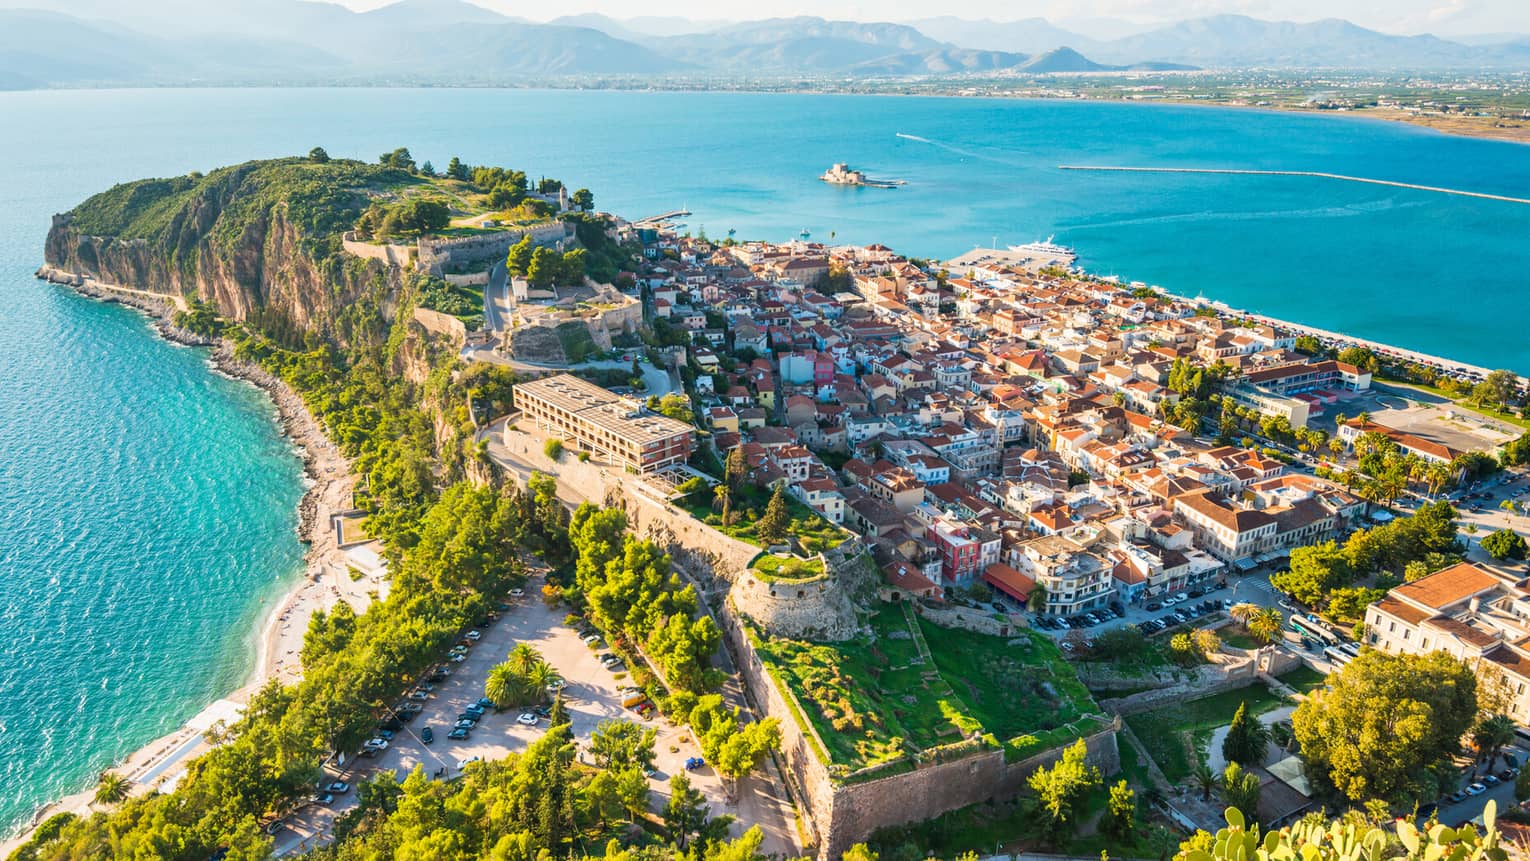 An aerial view of the city of Nafplion, Greece on a sunny day